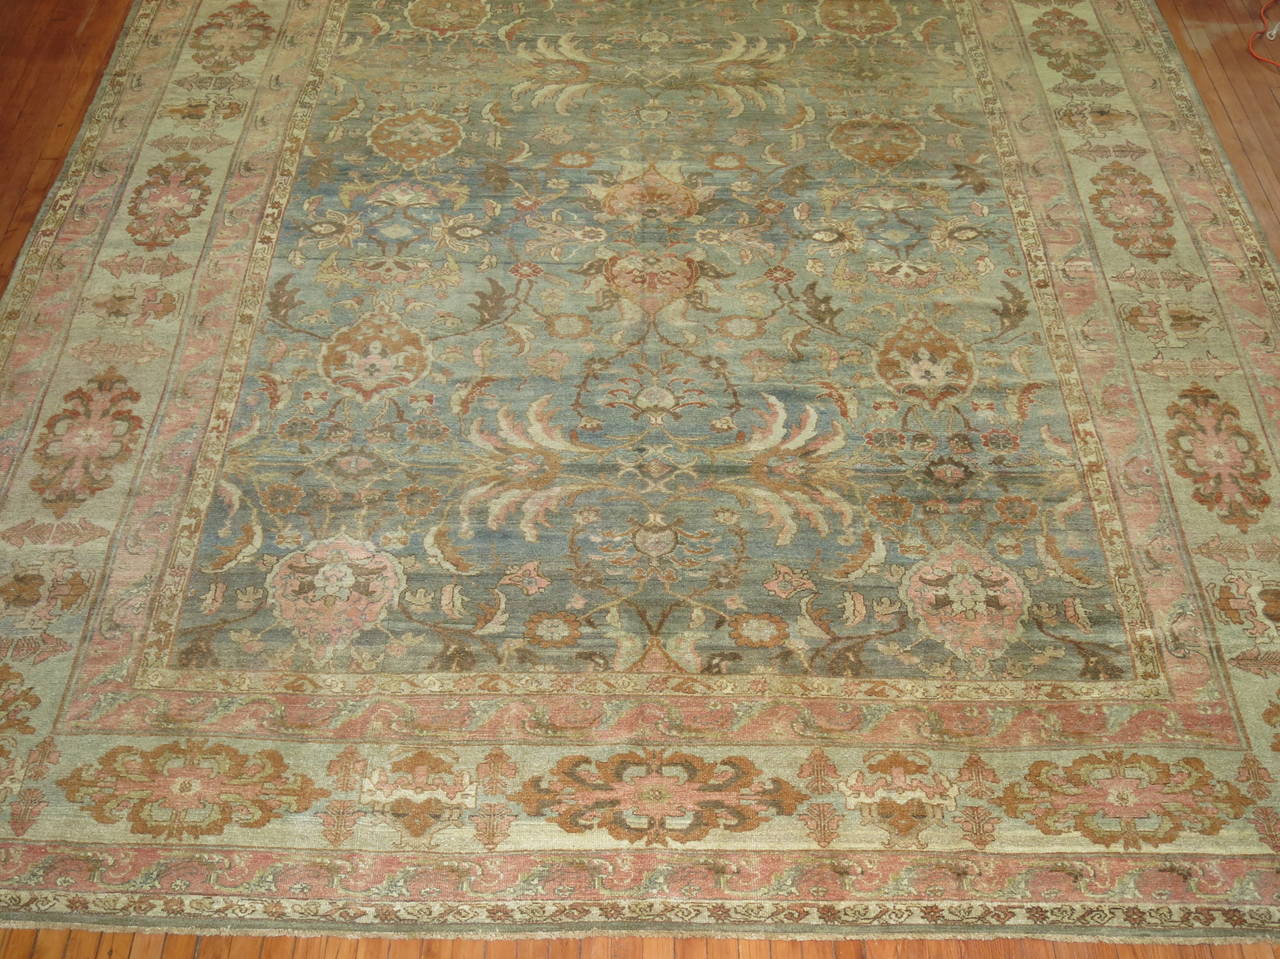 Exquisite early 20th century oversize Persian Malayer rug featuring soft earthy all-over palette.

Measures: 11'3” x 17'5”.